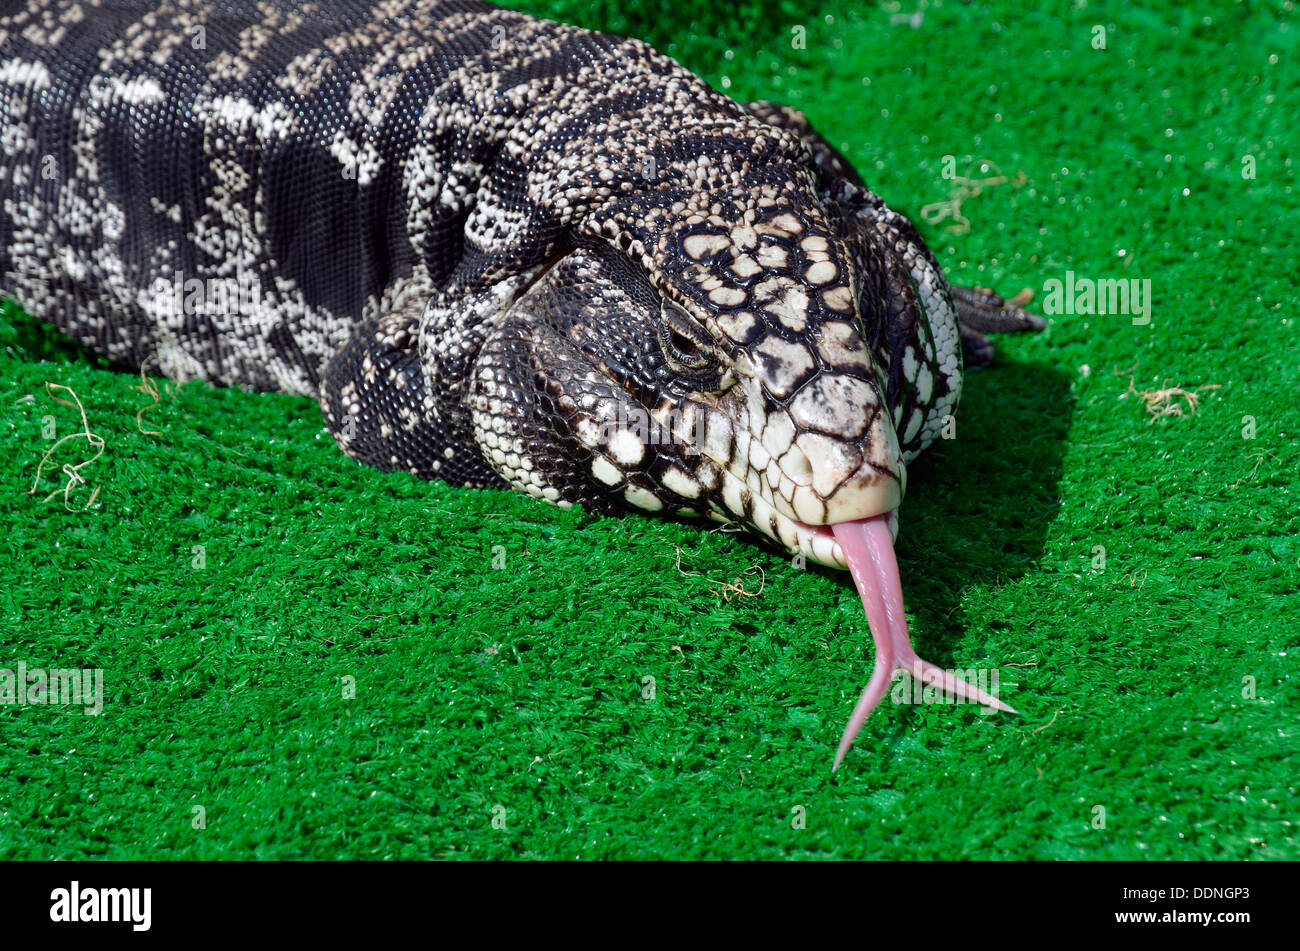 Argentine Black and White Tegu lizard (tegus merianae) of genus Tupinambis kept as a pet. A very docile and relaxed animal. Stock Photo